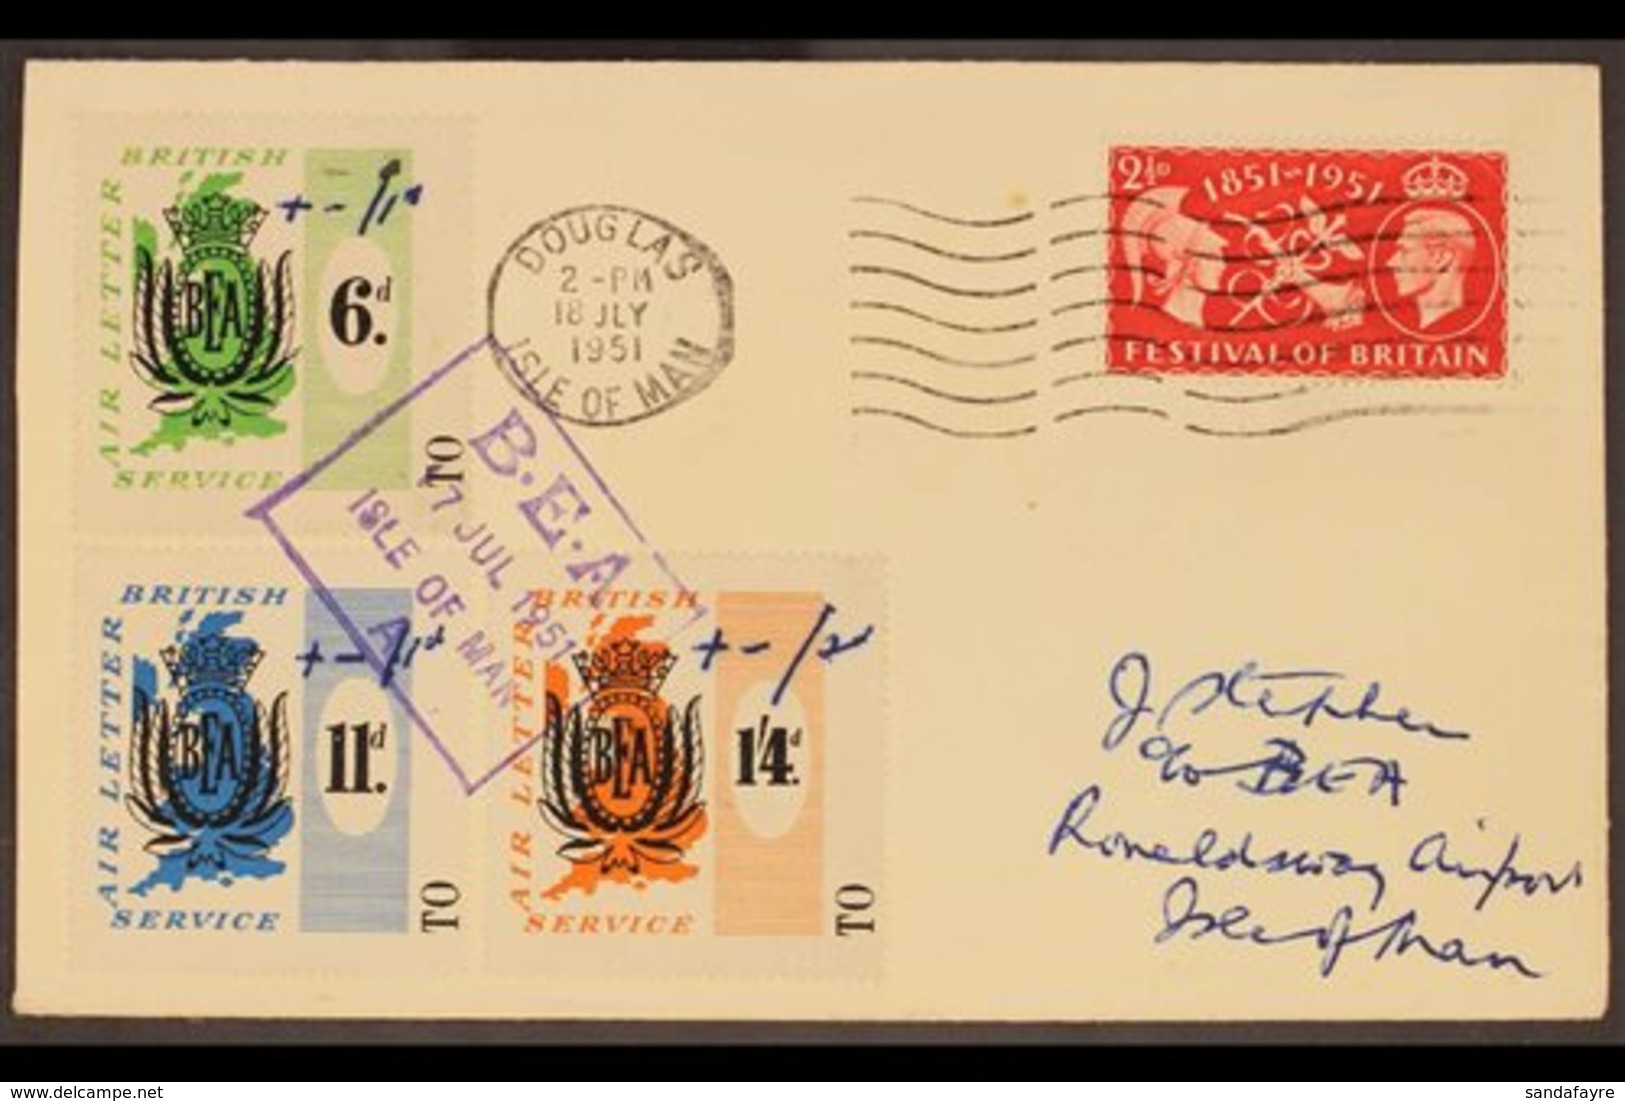 B.E.A. AIR LETTER SCARCE LOCAL SURCHARGES  1951 (17 July) Cover From Douglas To Ronaldsway Bearing GB 2½d Festival Plus  - Unclassified